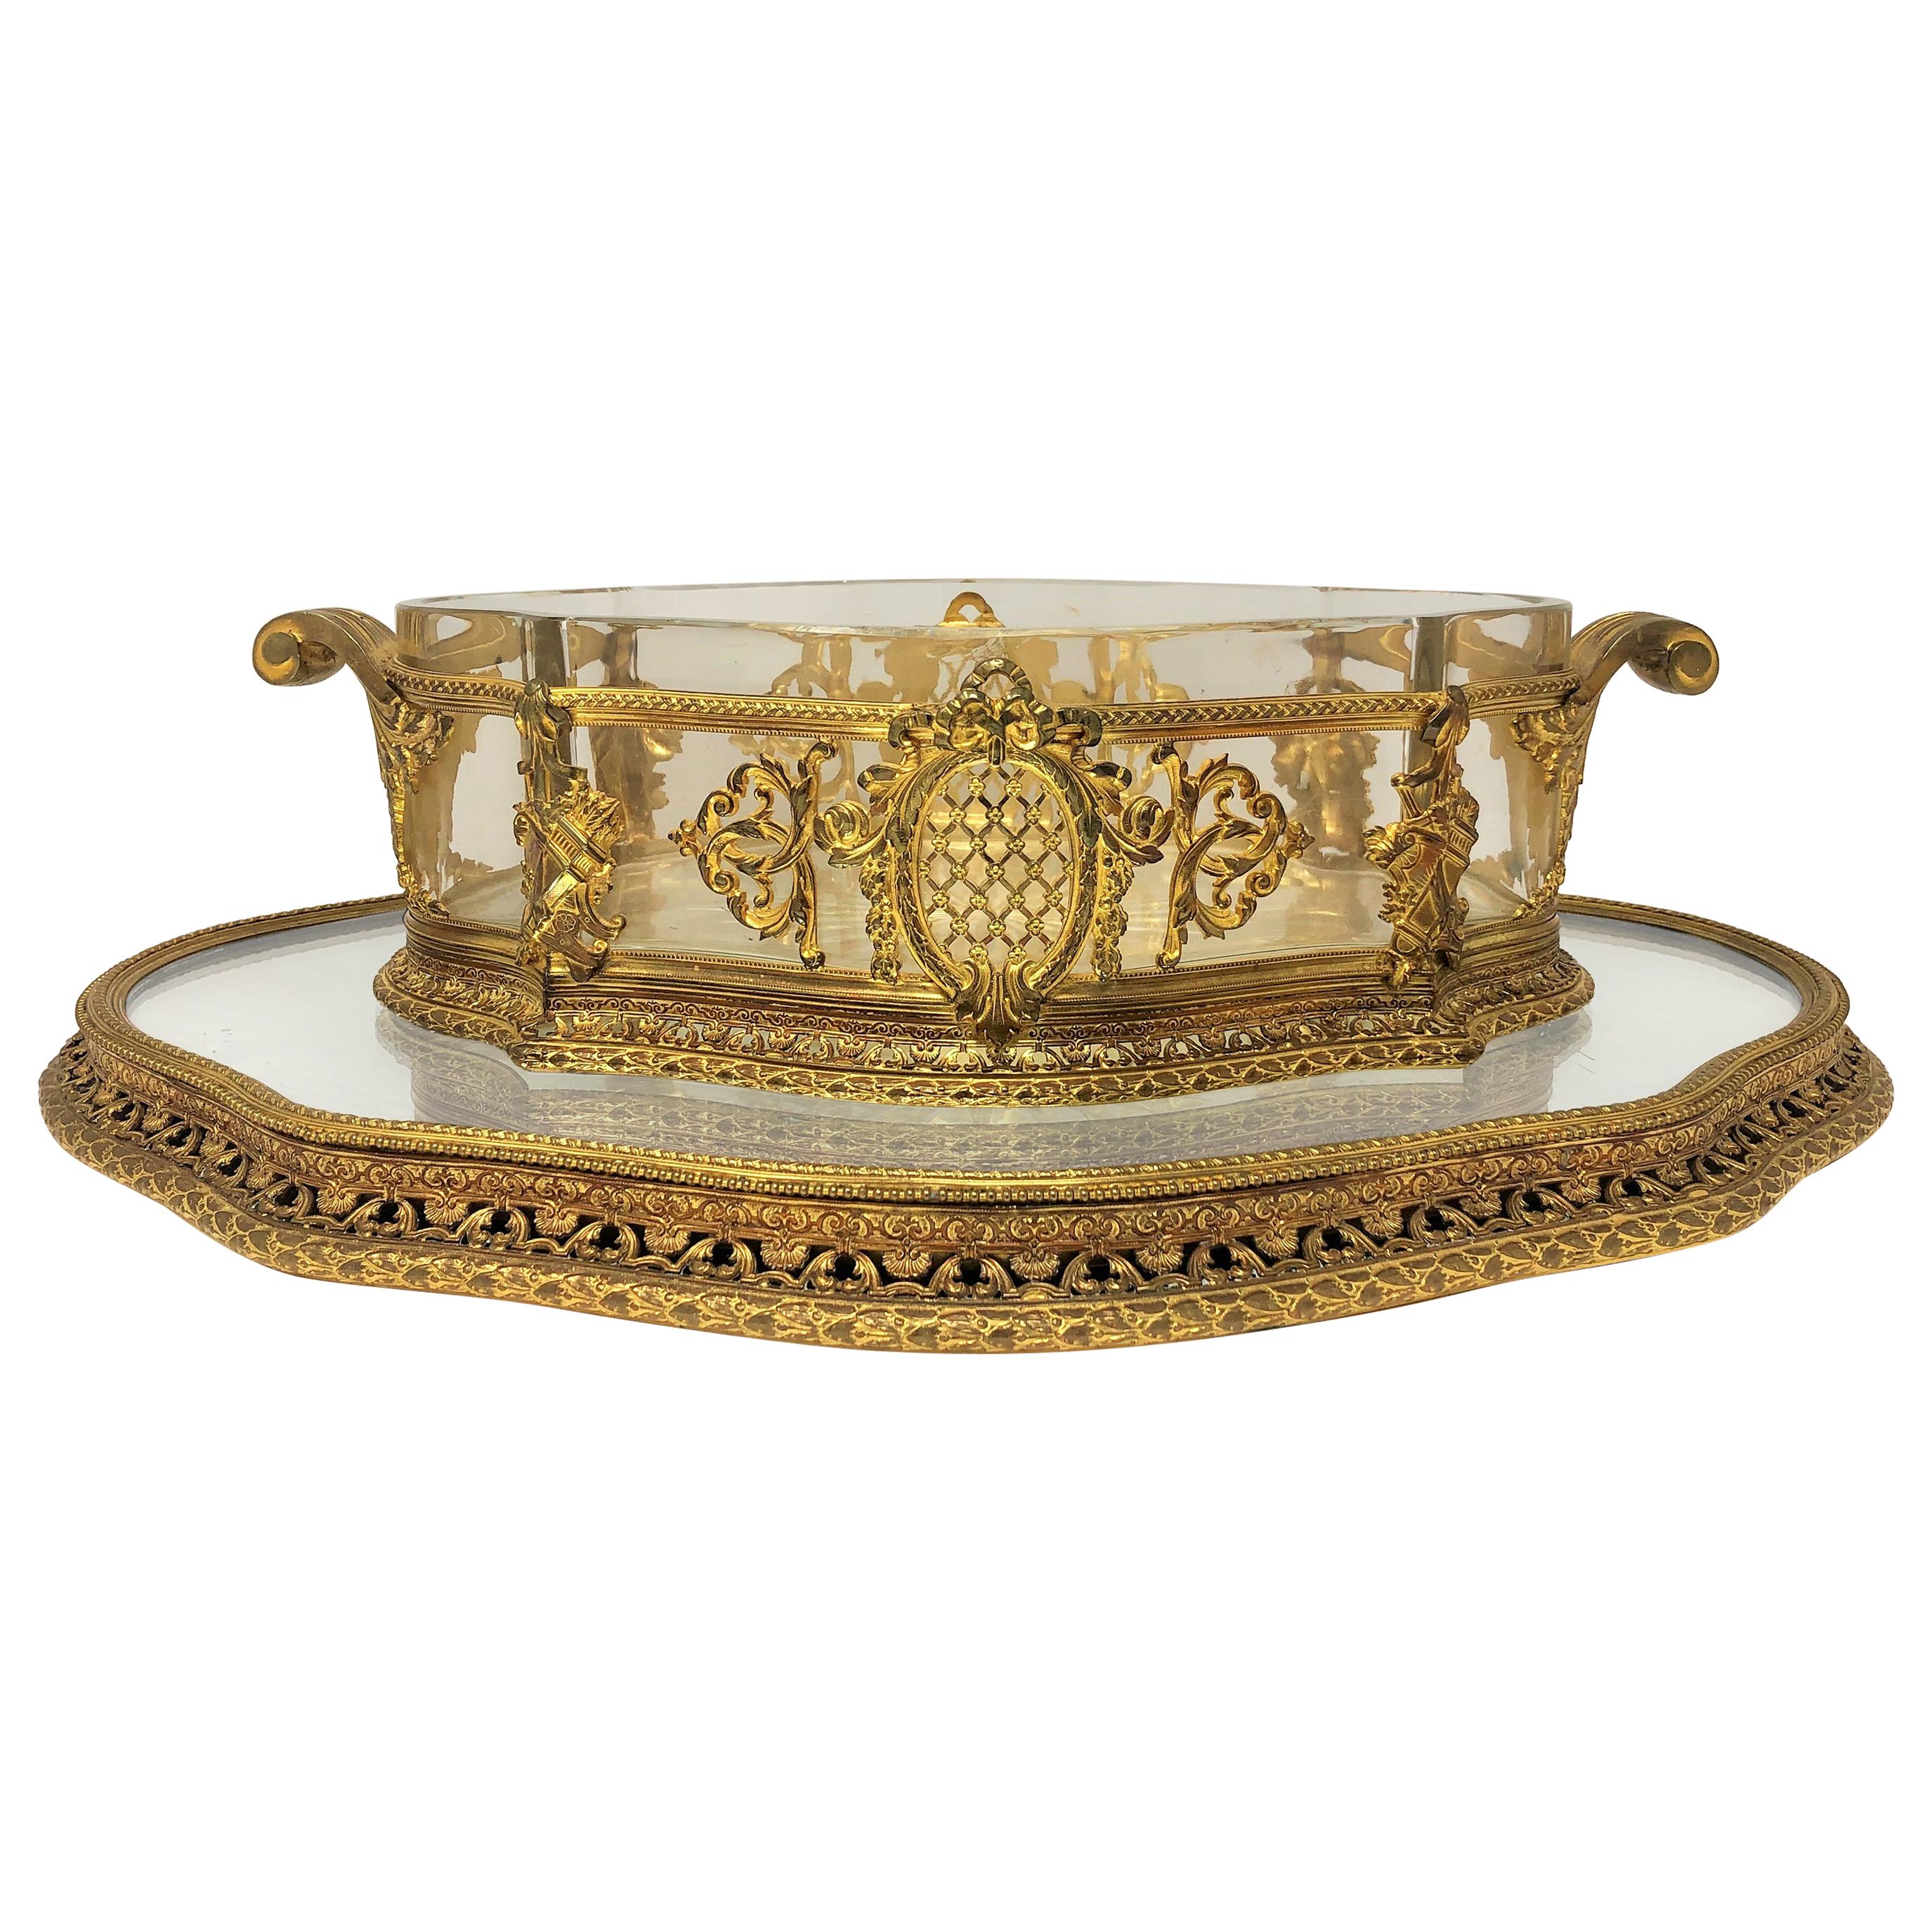 Antique French Bronze D'Ore Cut Crystal Centerpiece and Plateau, circa 1880s